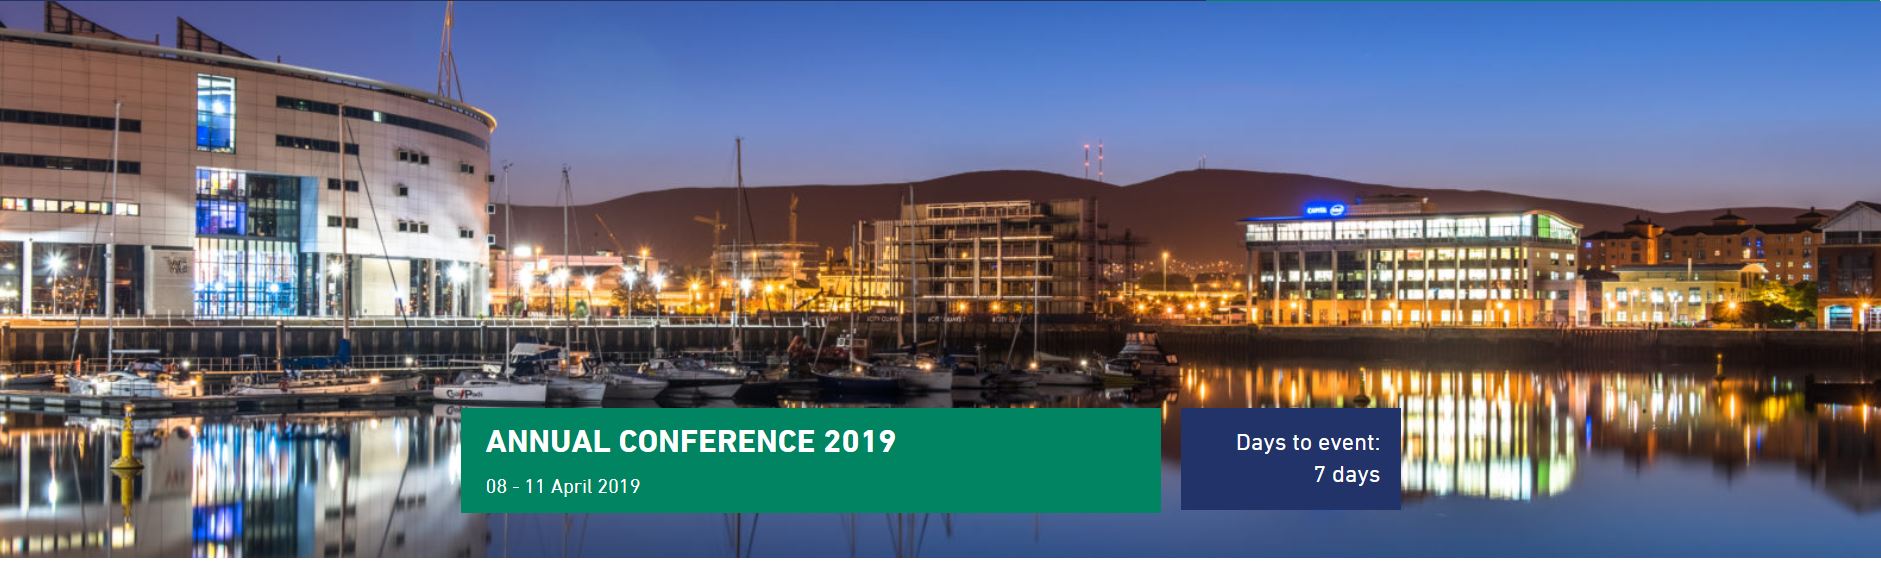 Society For General Microbiology Annual Meeting 2019